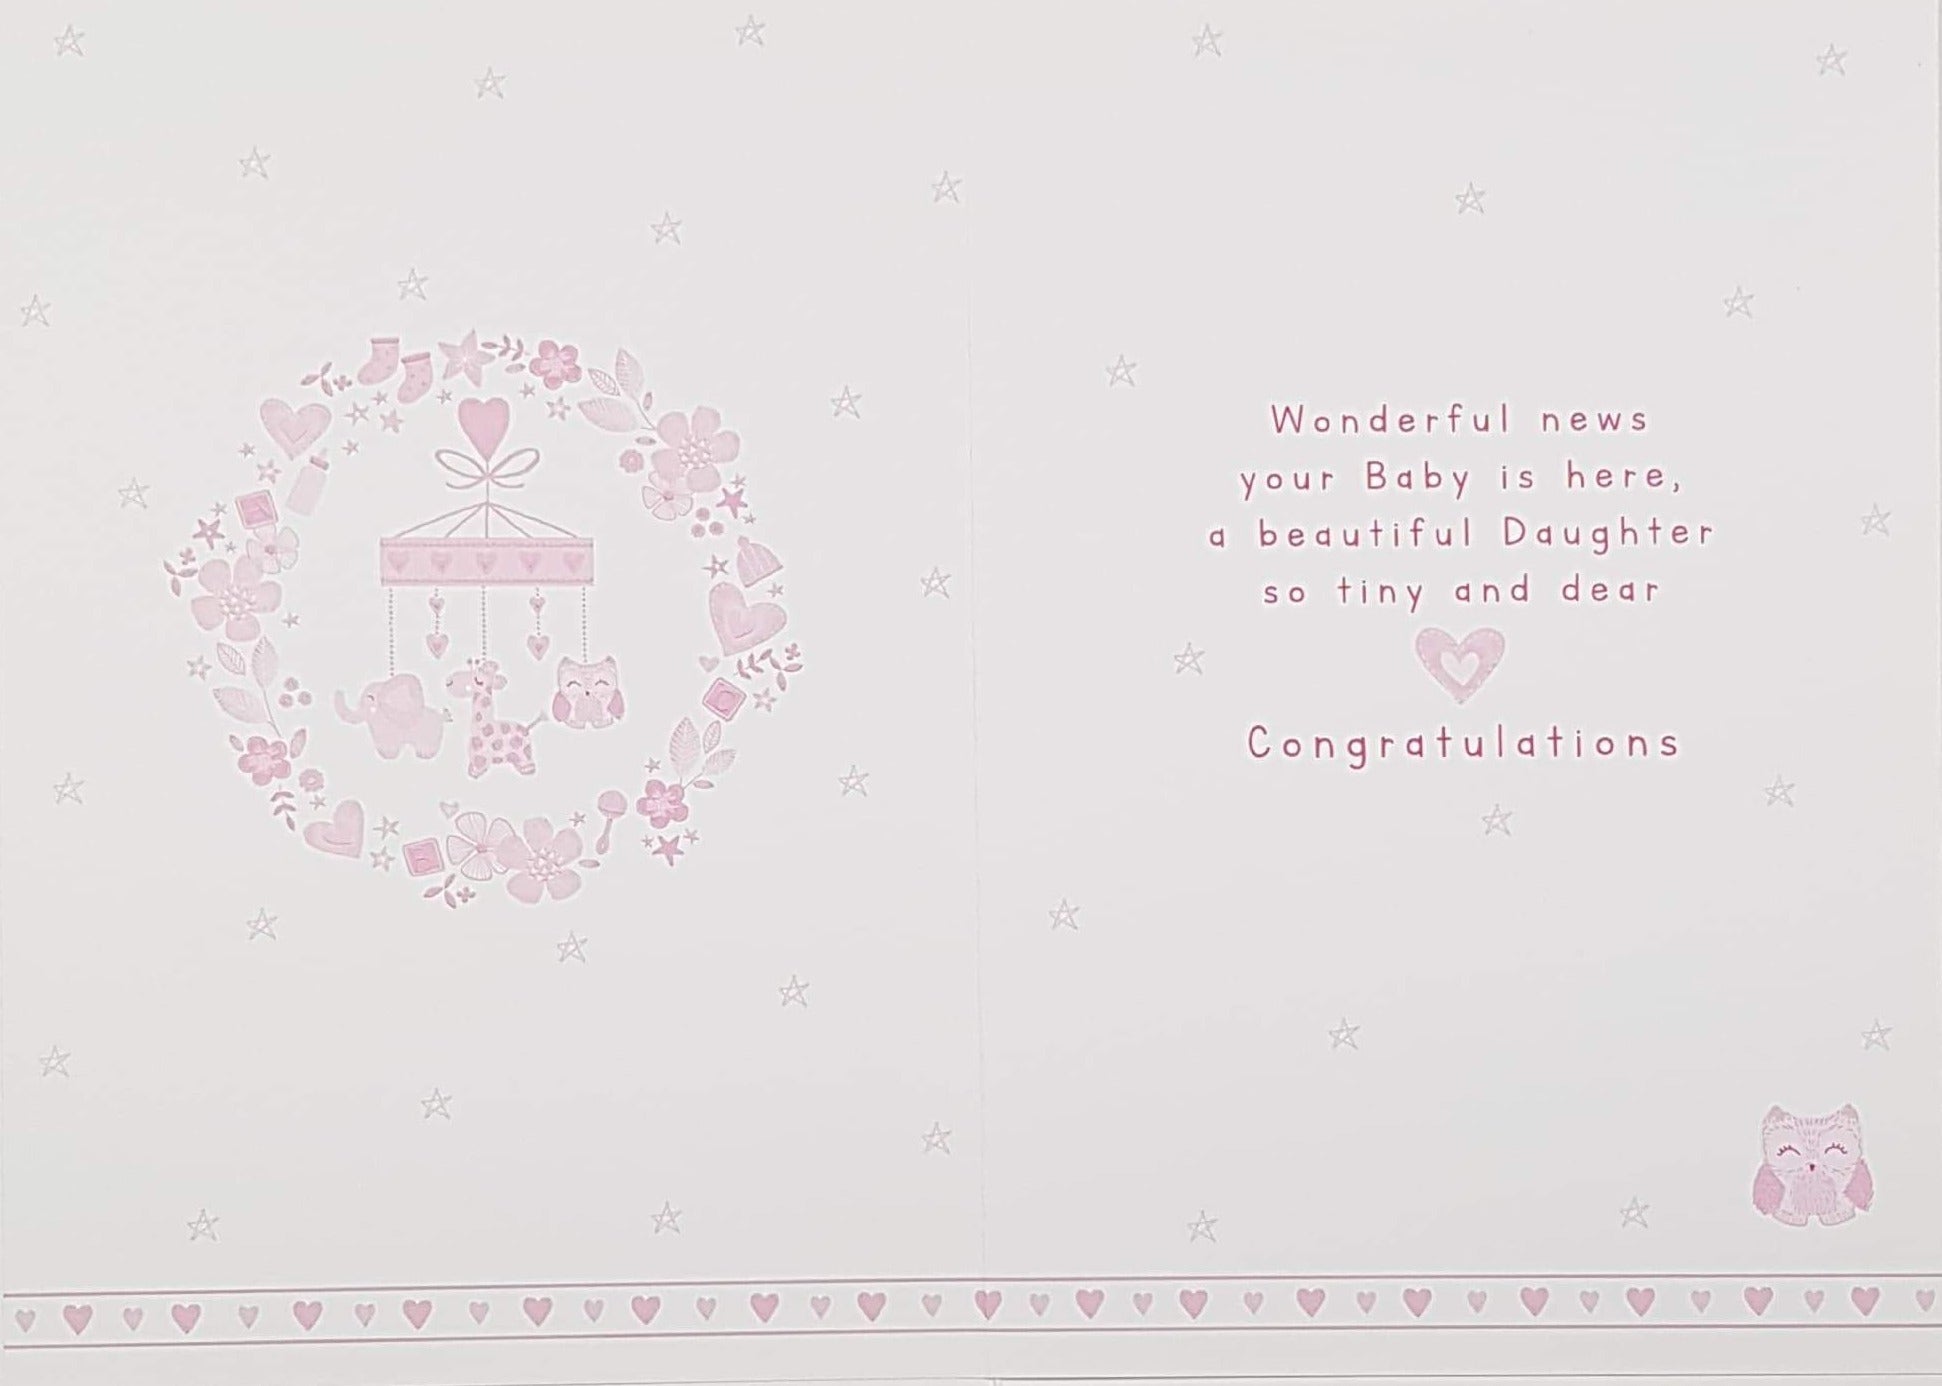 New Baby Card - Girl (Daughter) / Big Pink 'B' Decorated By Flowers